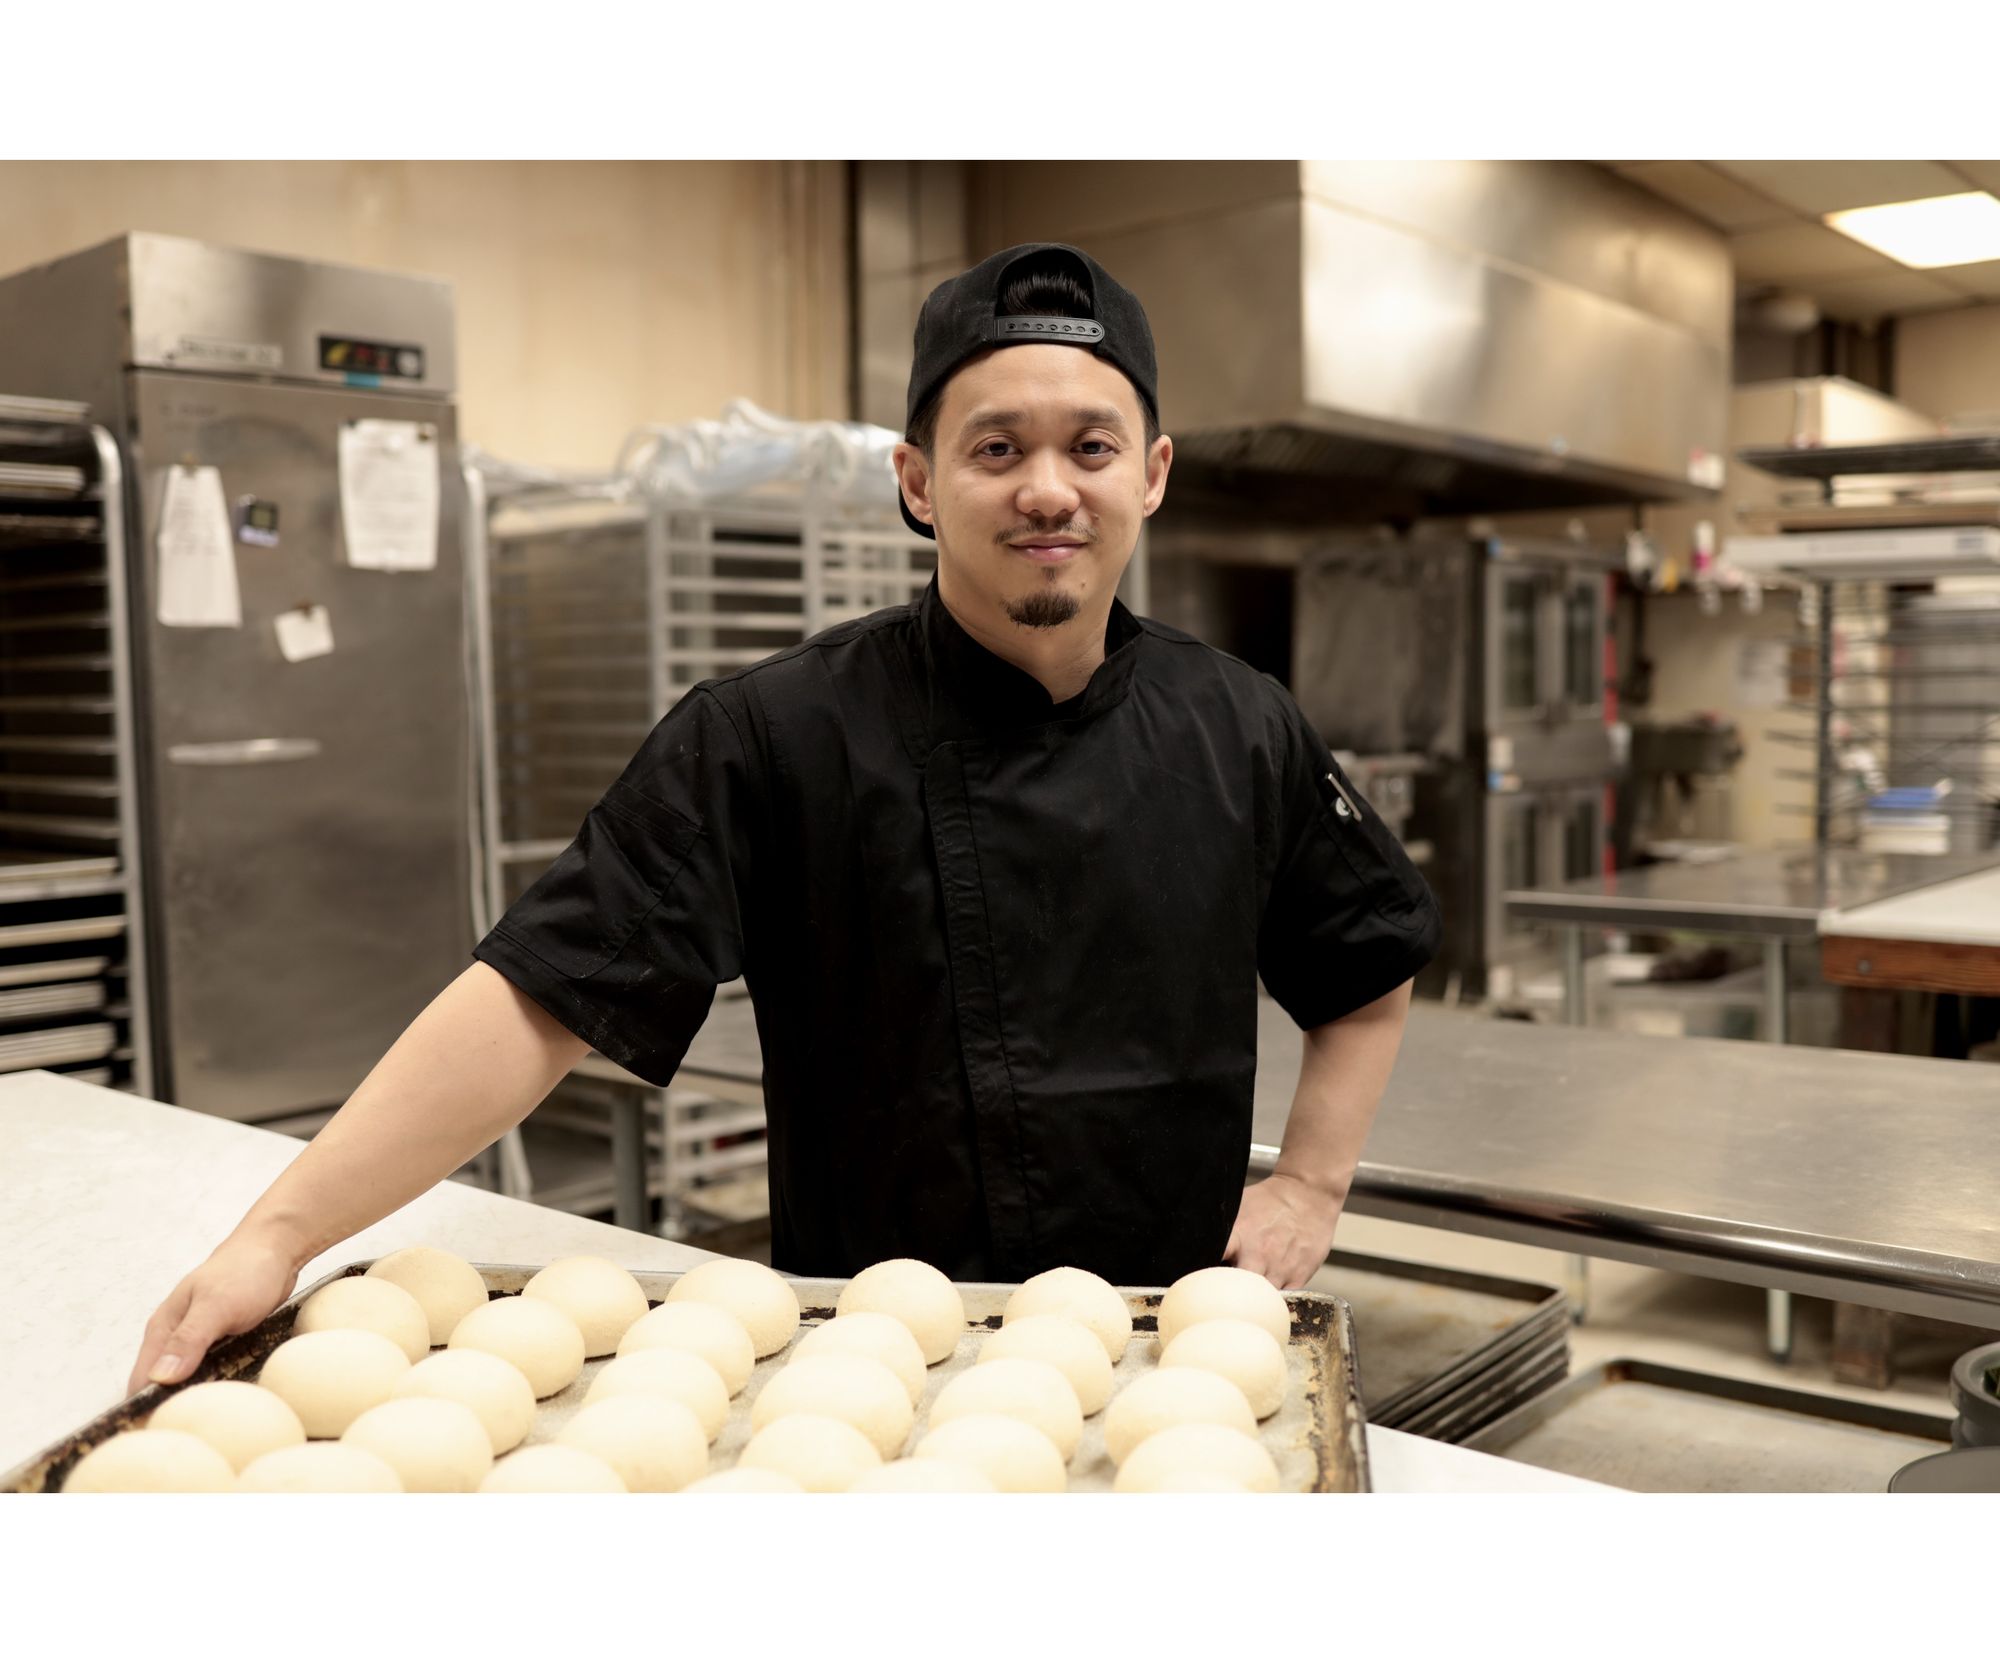 A Dozen Pandesal at a Time - Angie’s Bakery